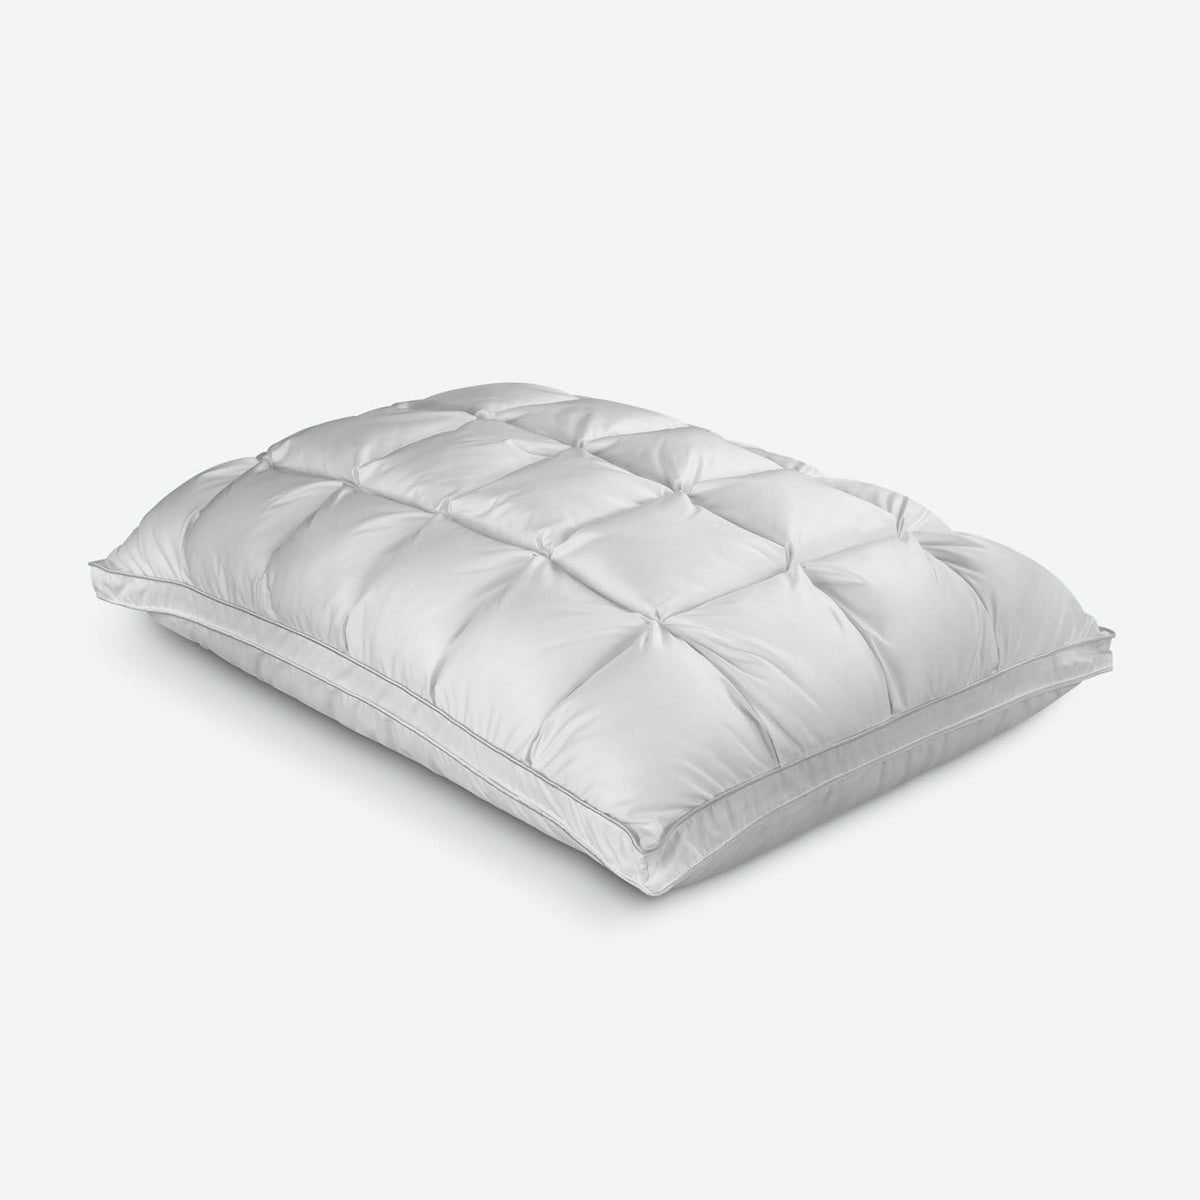 Image of the SoftCell® Lite Pillow with the SoftCell side facing up on a white background